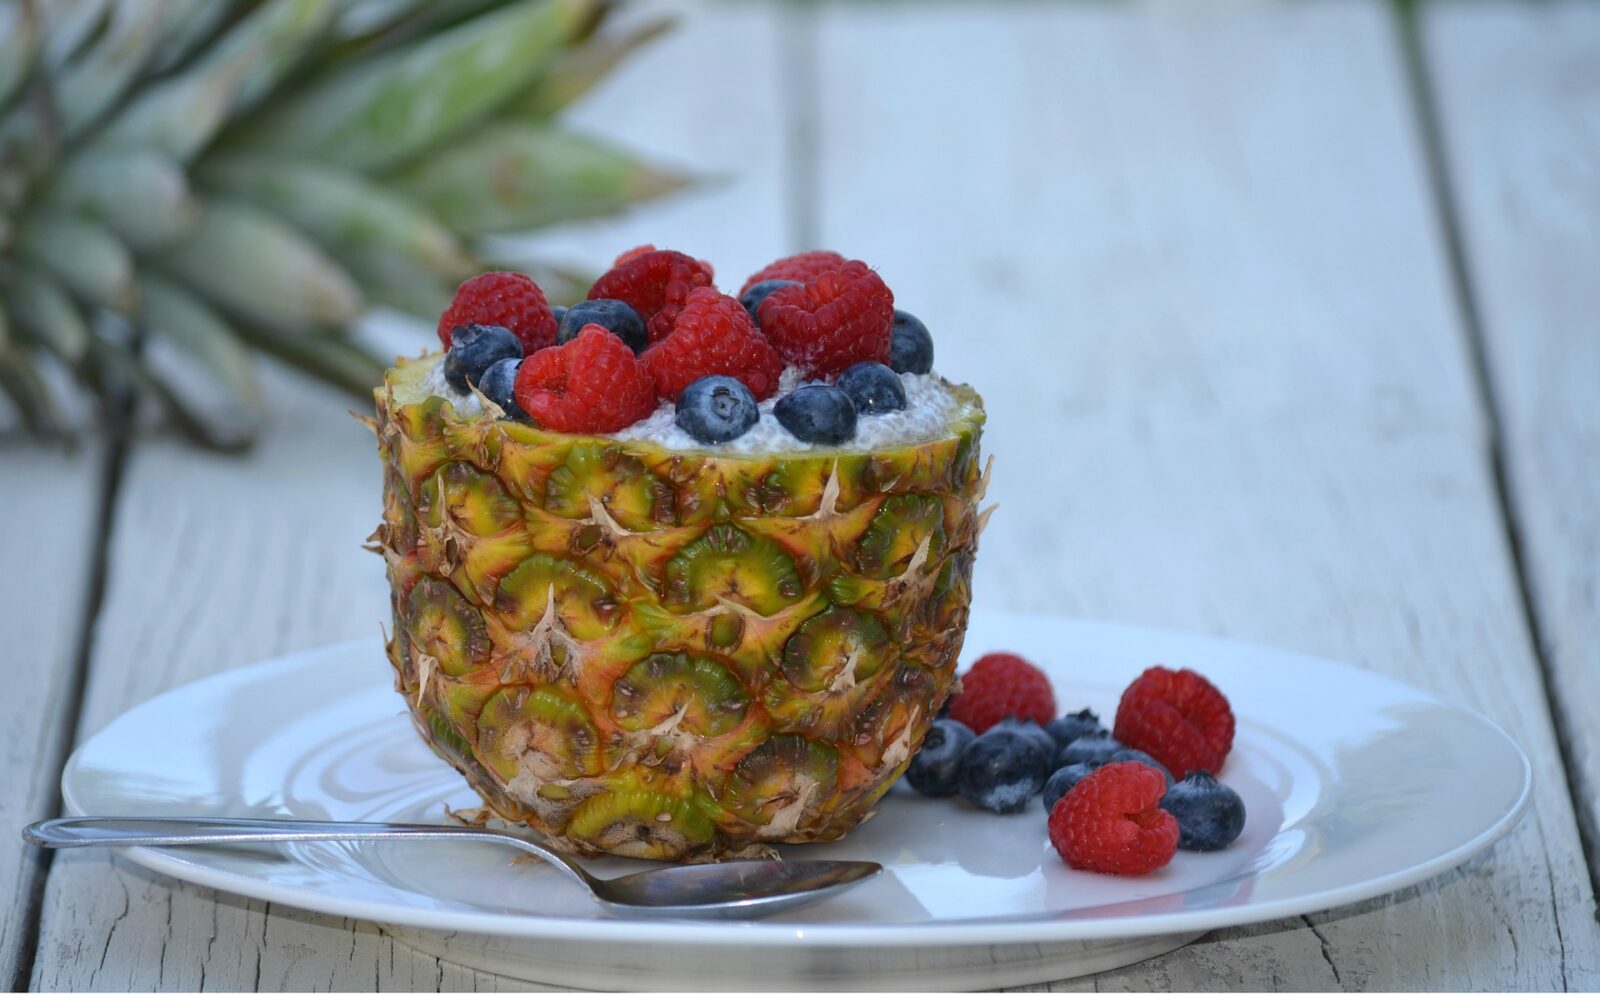 veganly vitamins pineapple and fruits